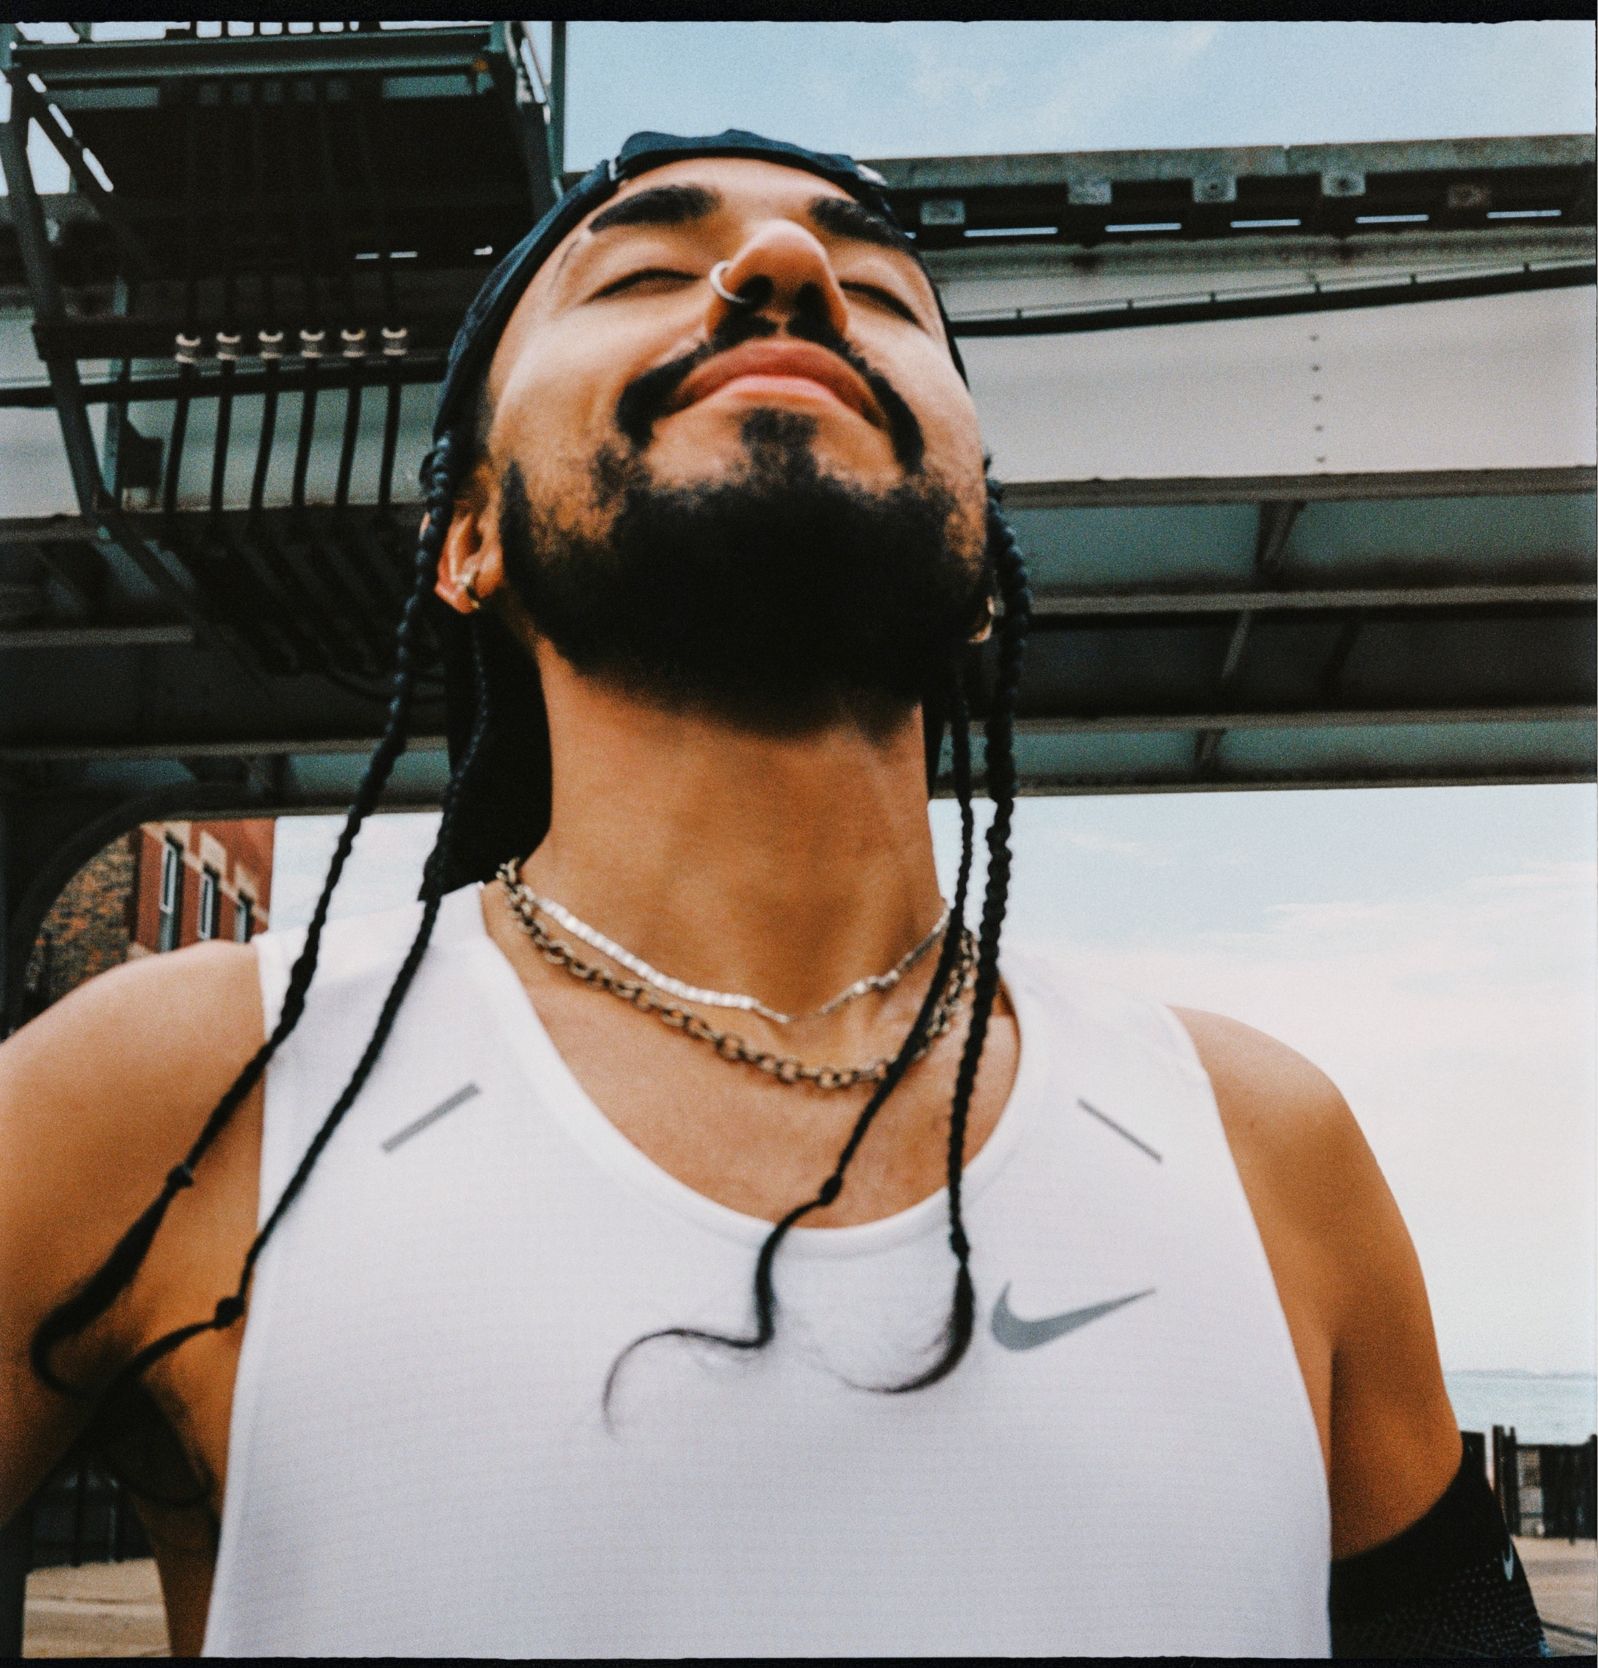 Man with nose ring, beard, braided hair and white Nike top has head tilted up, eyes closed and smiling